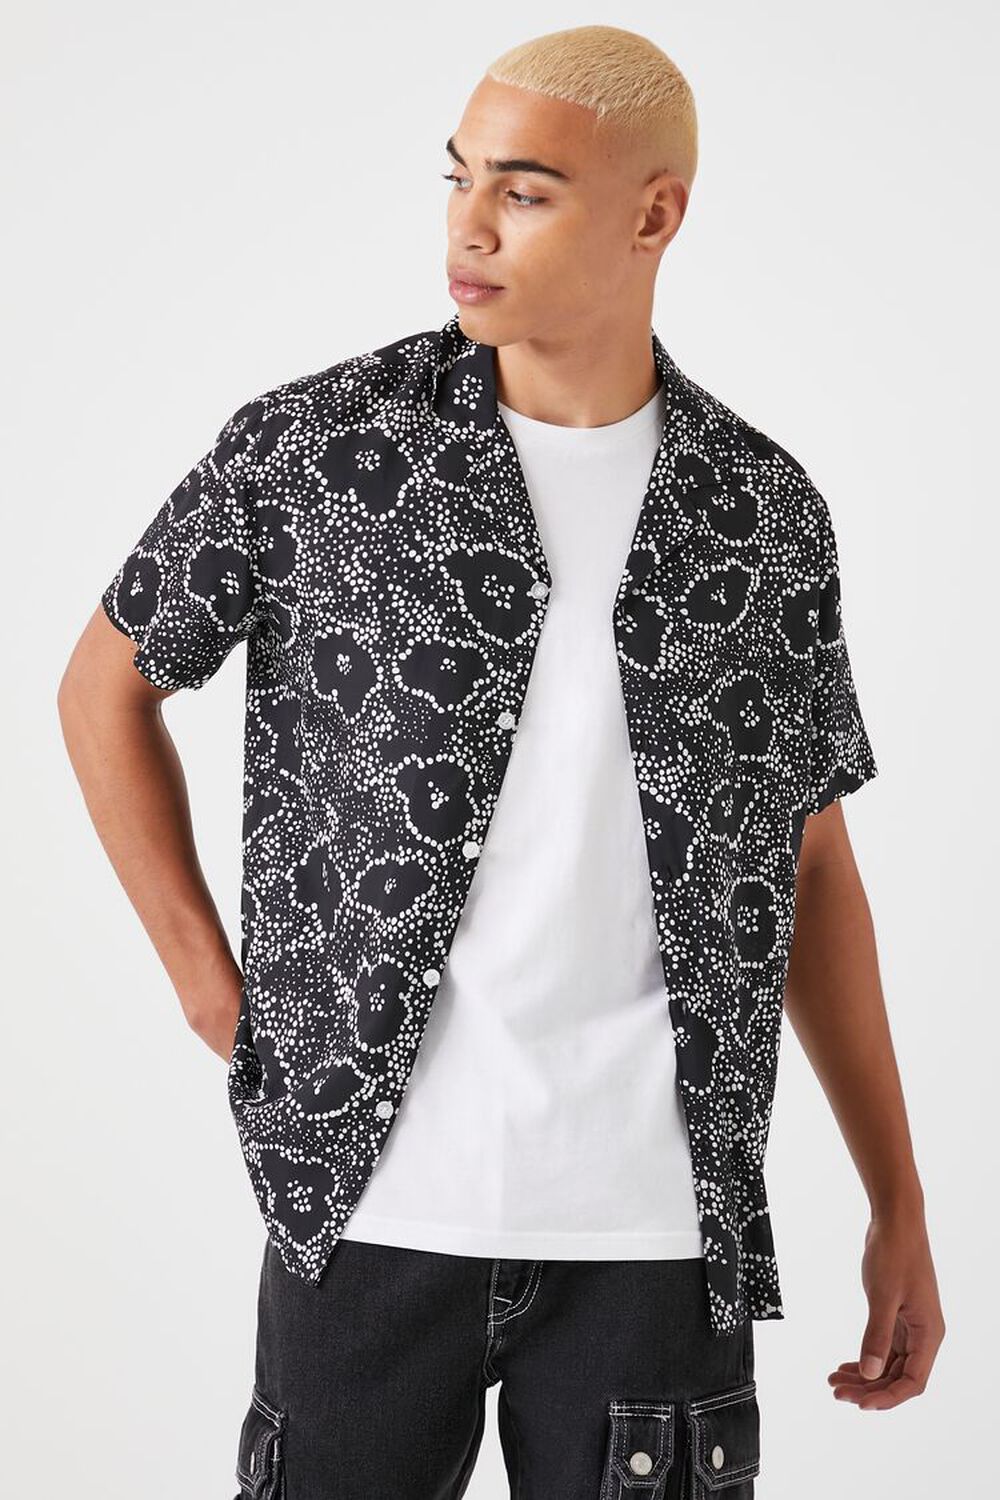 BLACK/WHITE Abstract Floral Print Shirt, image 2